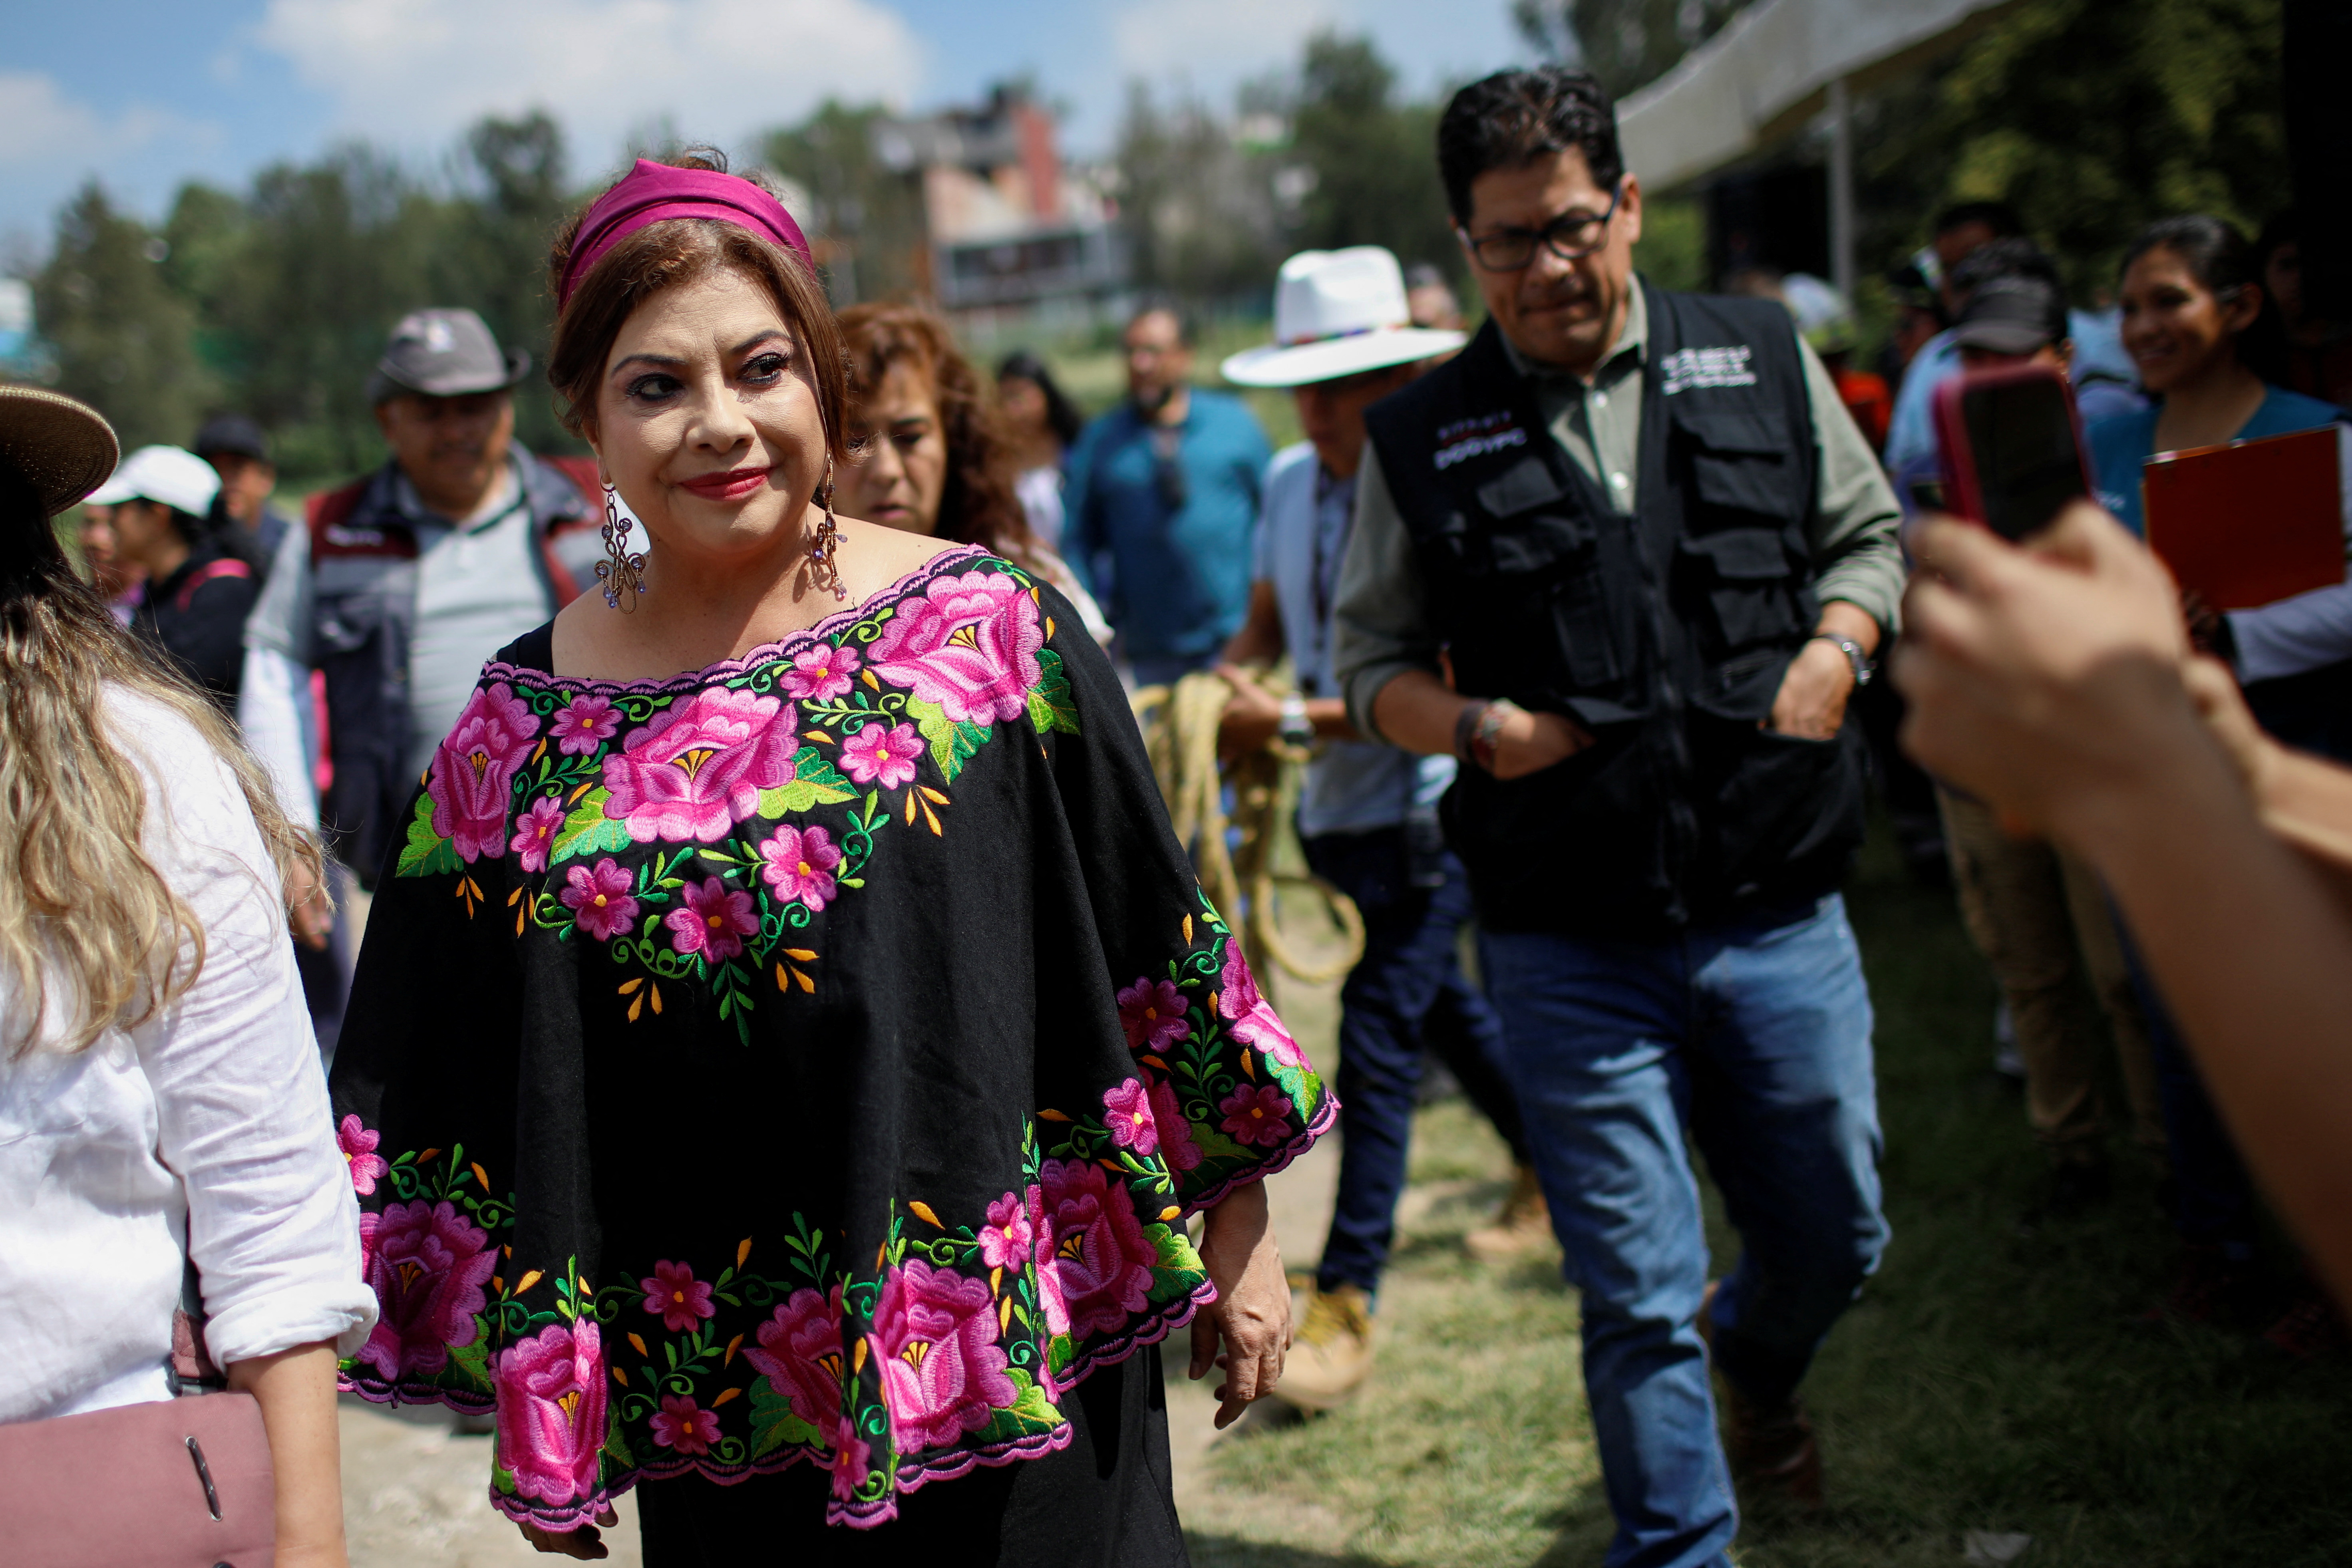 Women aspiring to run for the post of mayor, in Mexico City